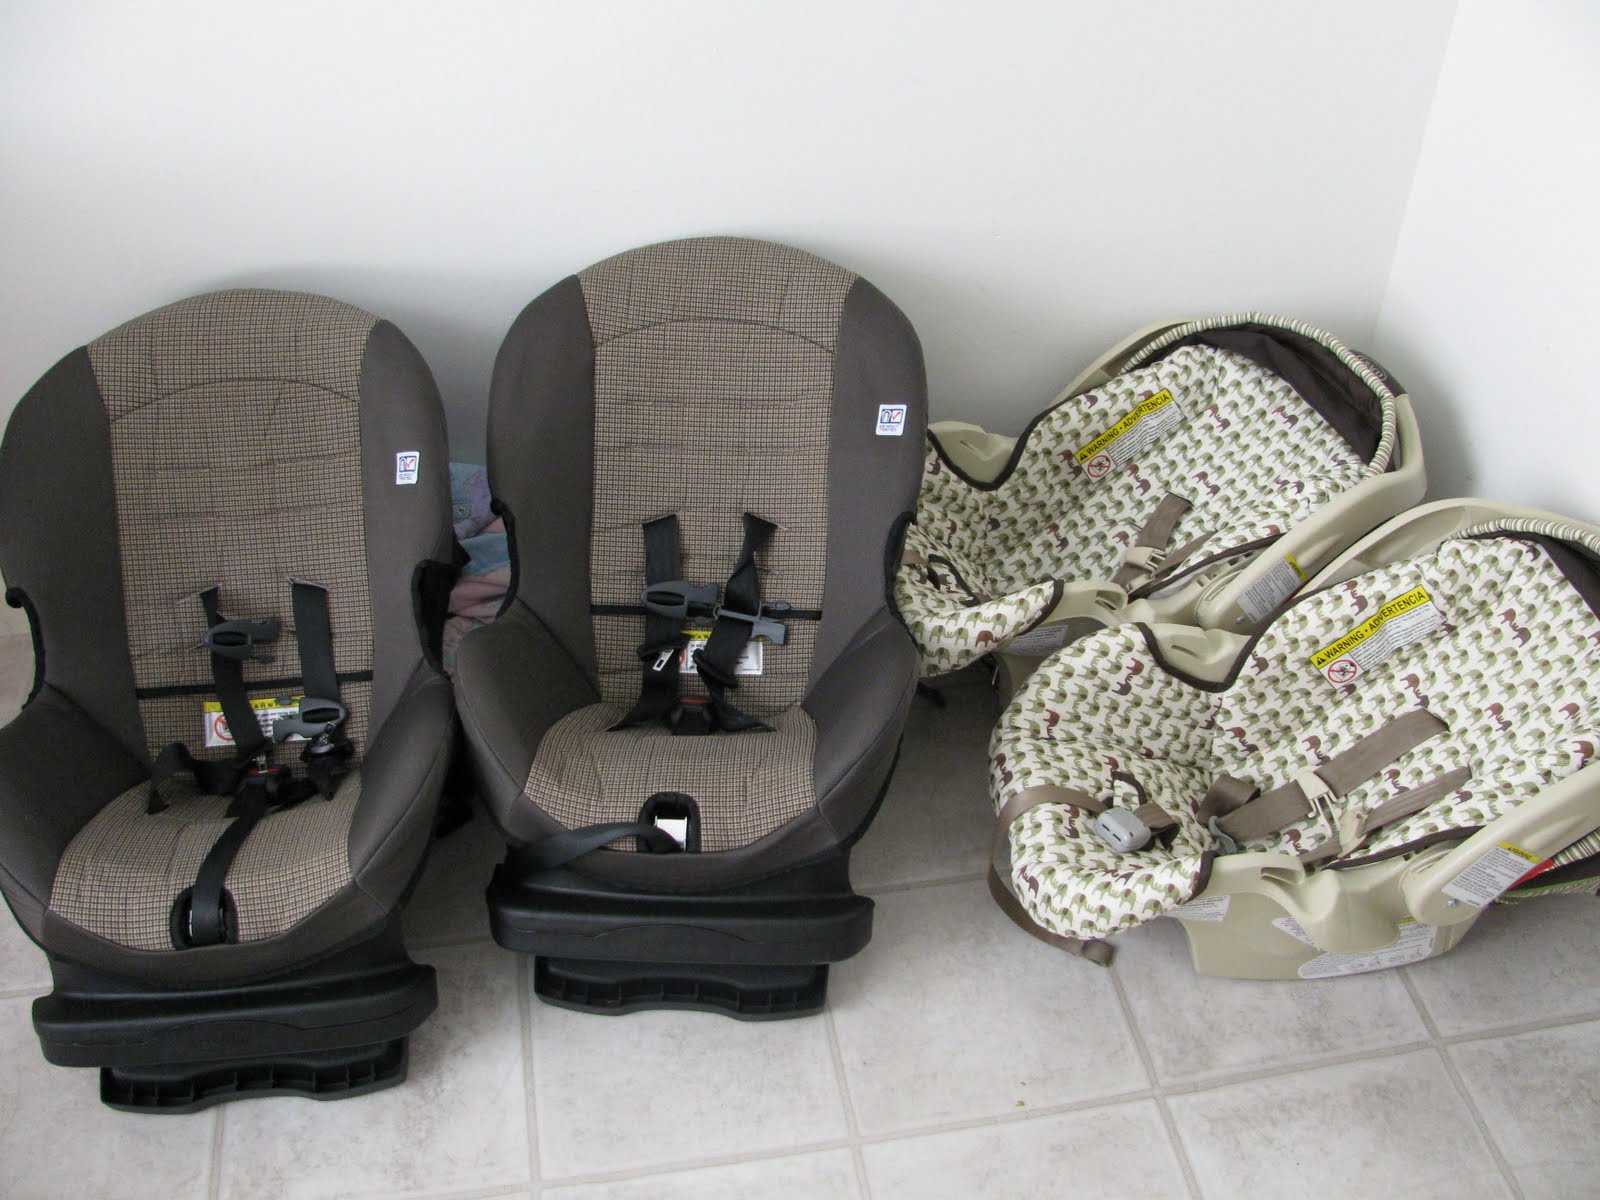 How To Get Free Car Seats My, Does Wic Give Out Car Seats